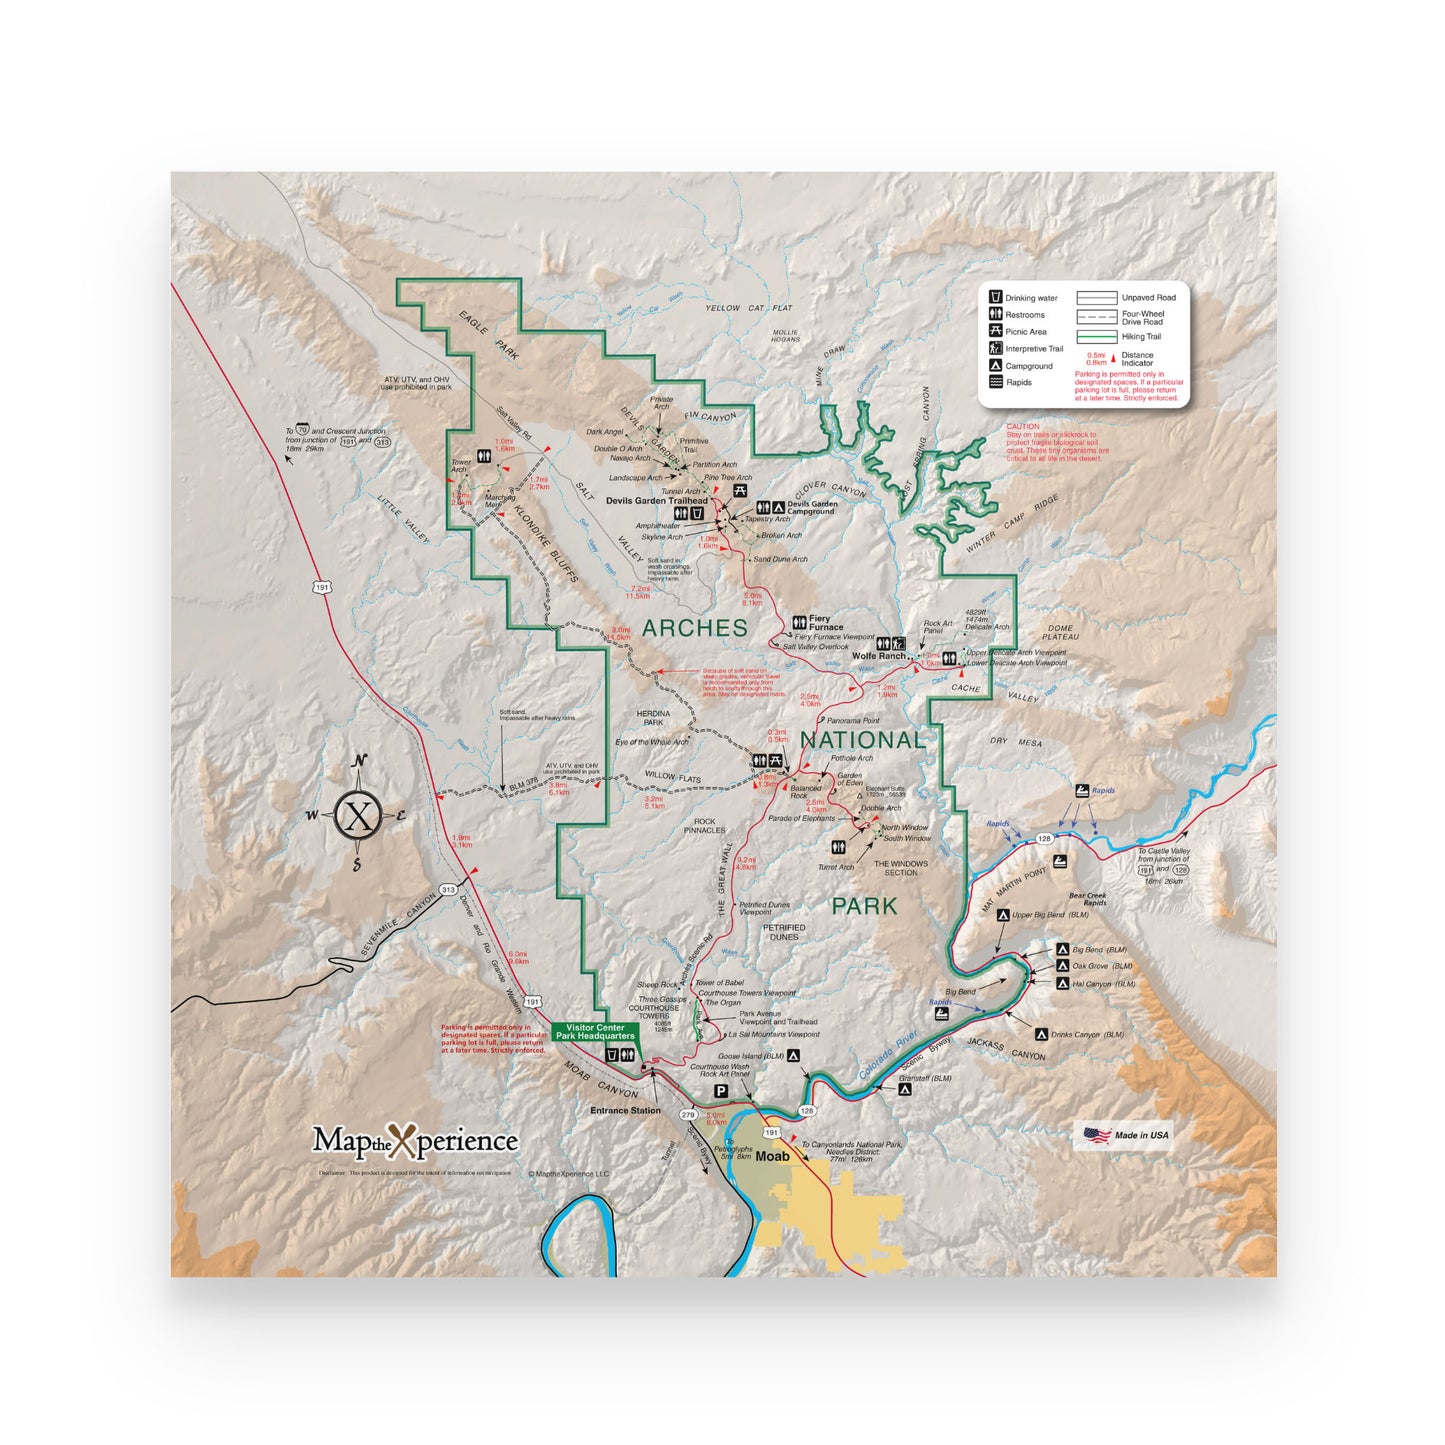 Arches National Park Map Poster | Free Mobile Map